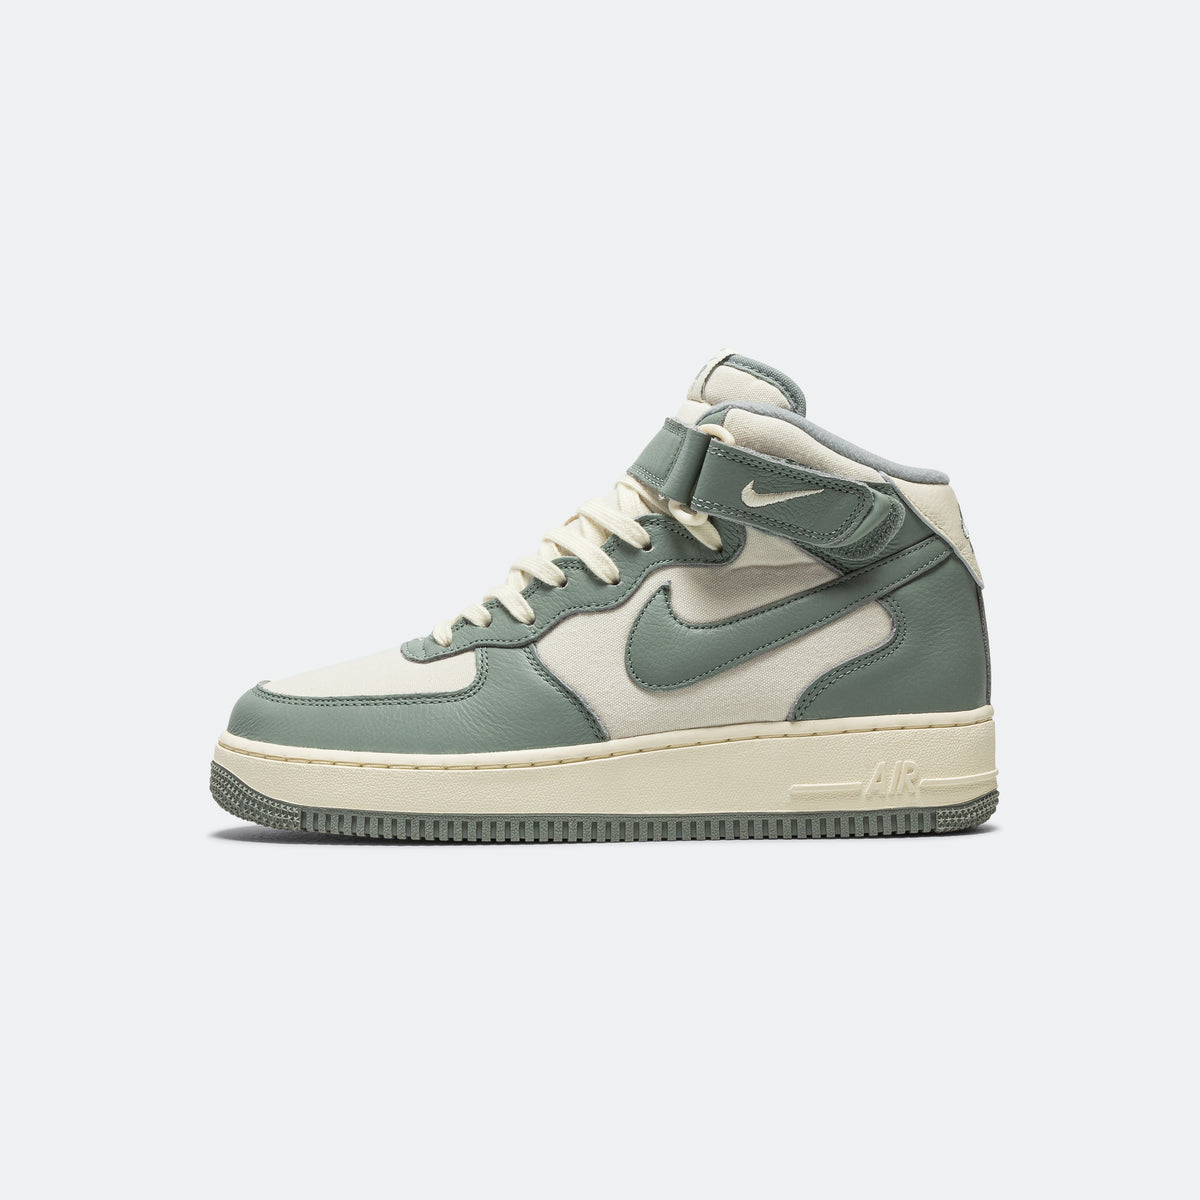 Nike Air Force 1 Mid '07 LX NBHD - Coconut Milk/Mica Green | Up There ...